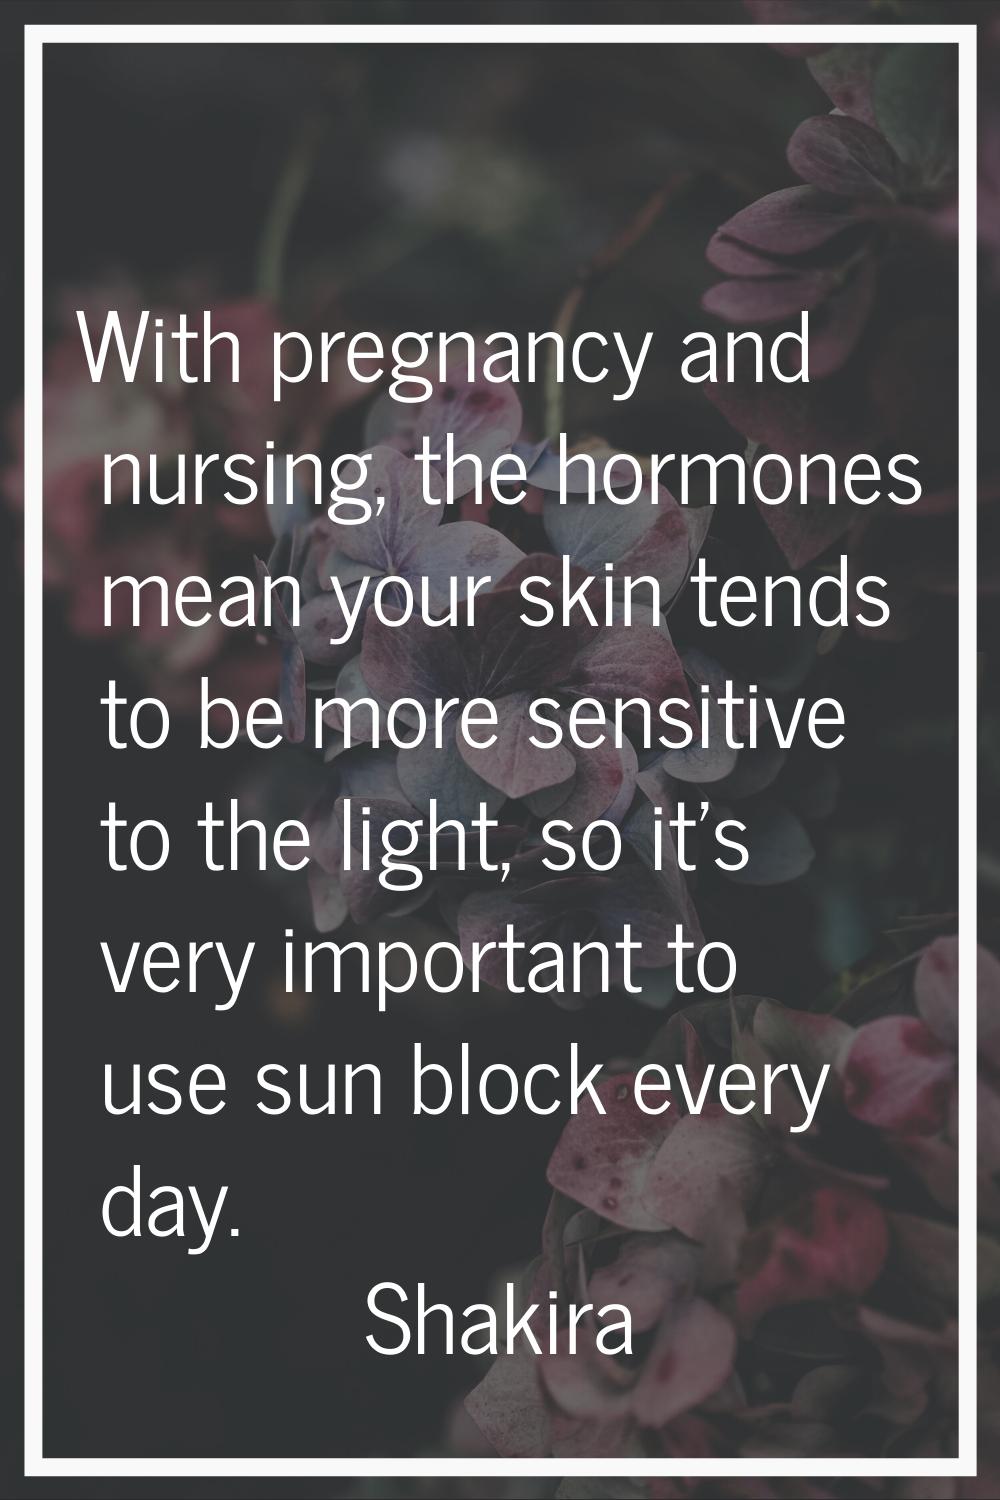 With pregnancy and nursing, the hormones mean your skin tends to be more sensitive to the light, so